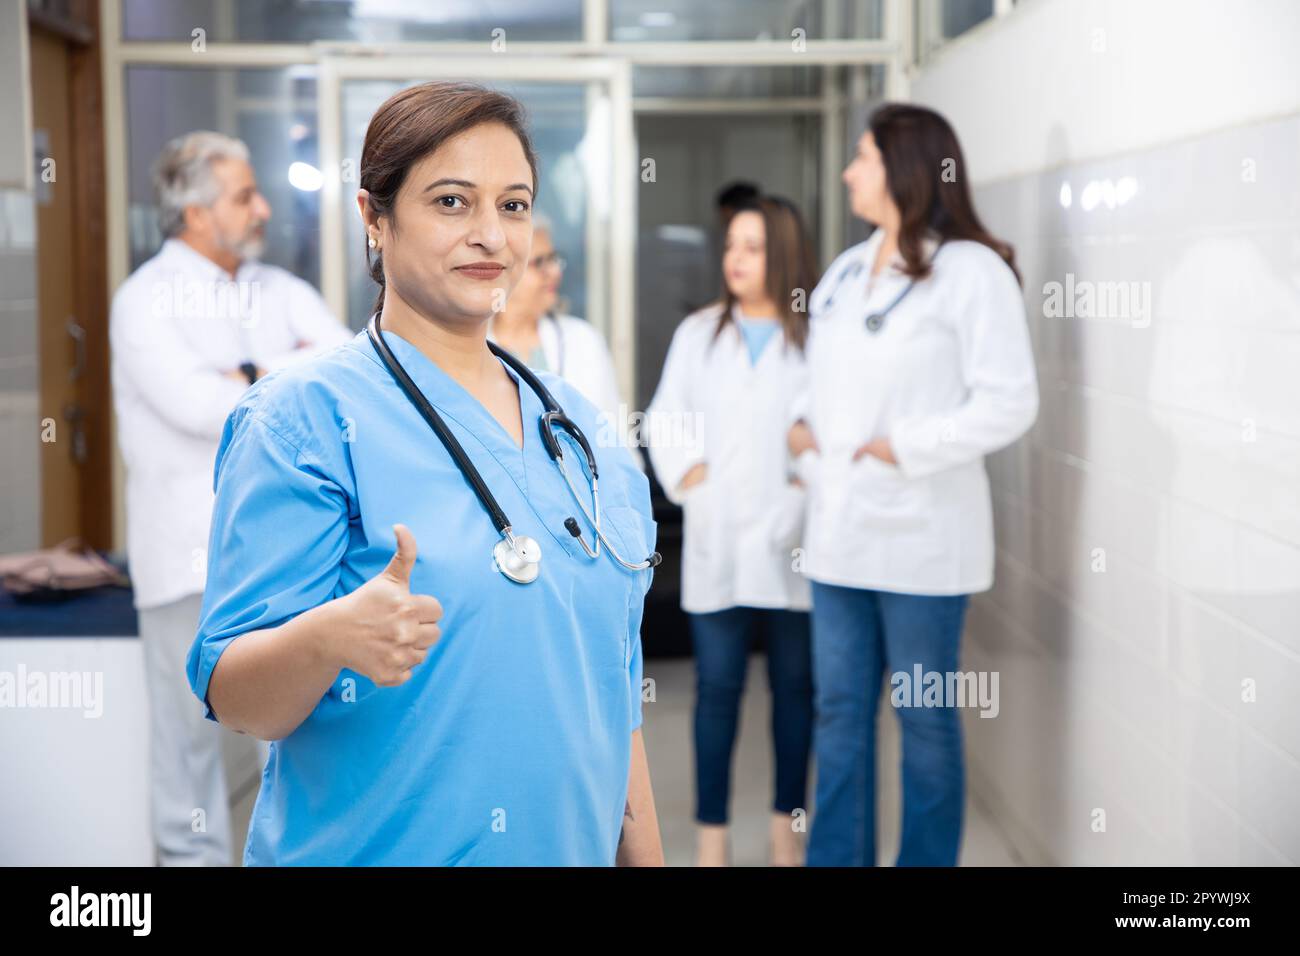 Indian female nurse and medical staff wearing stethoscope standing at hospital corridor, healthcare and medical concept. Stock Photo